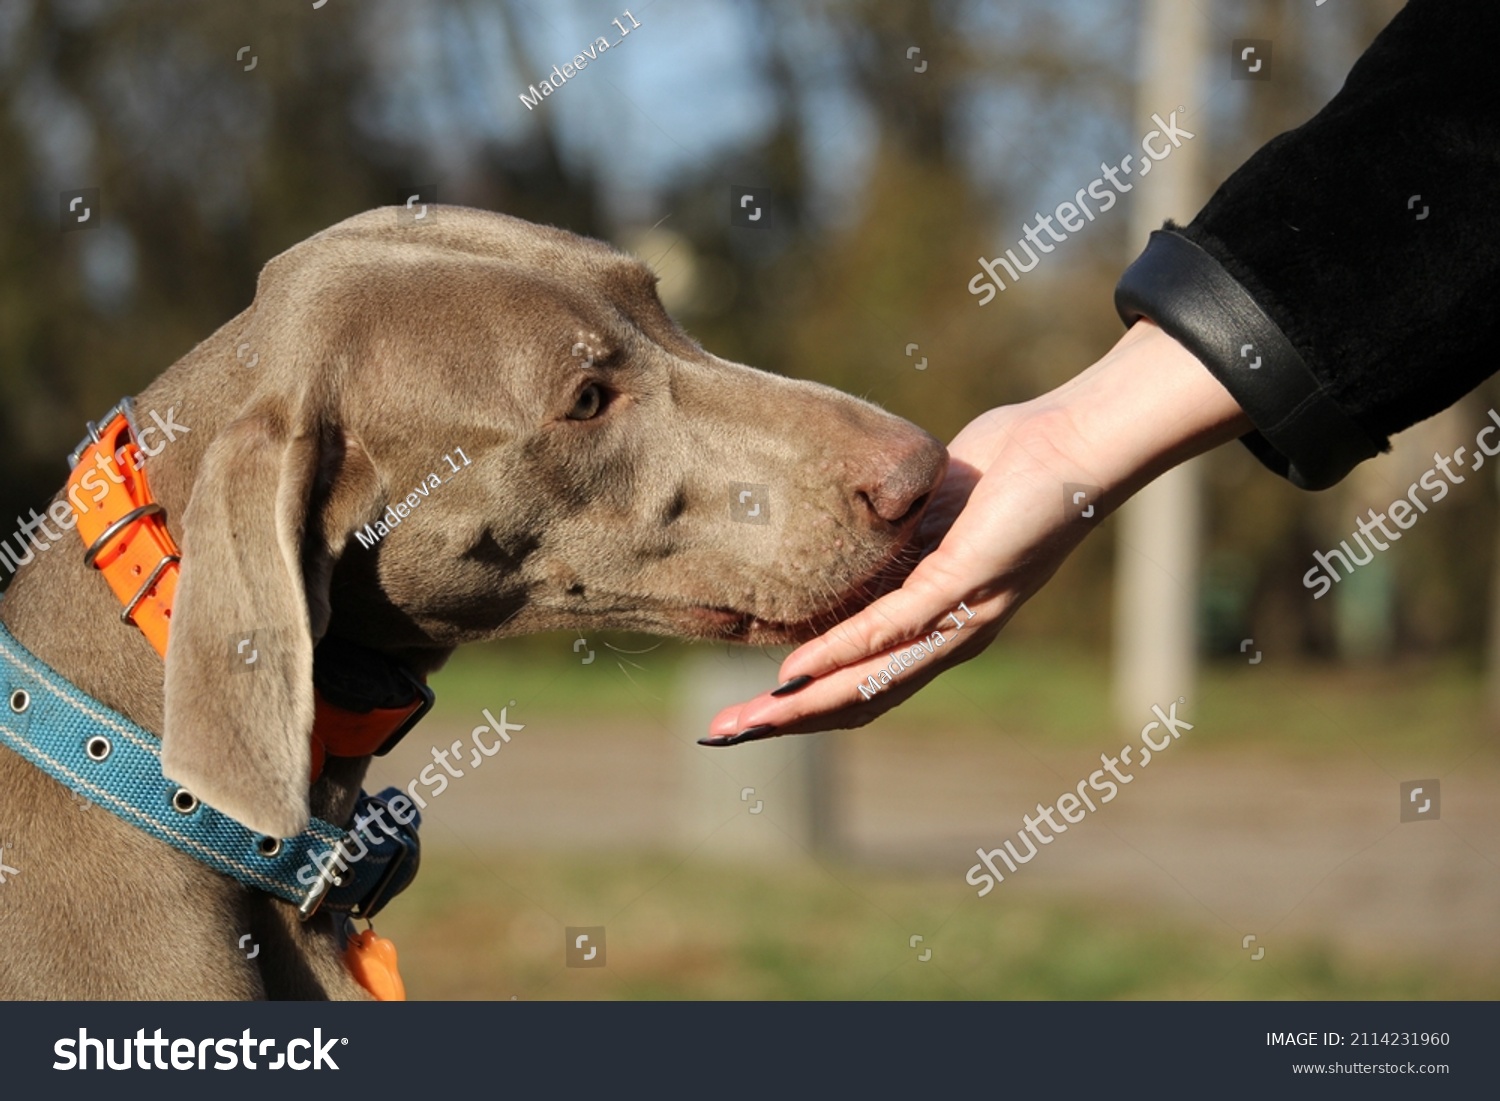 Portrait of a Weimaraner dog with. Hunting dog. Dog eats from hand #2114231960